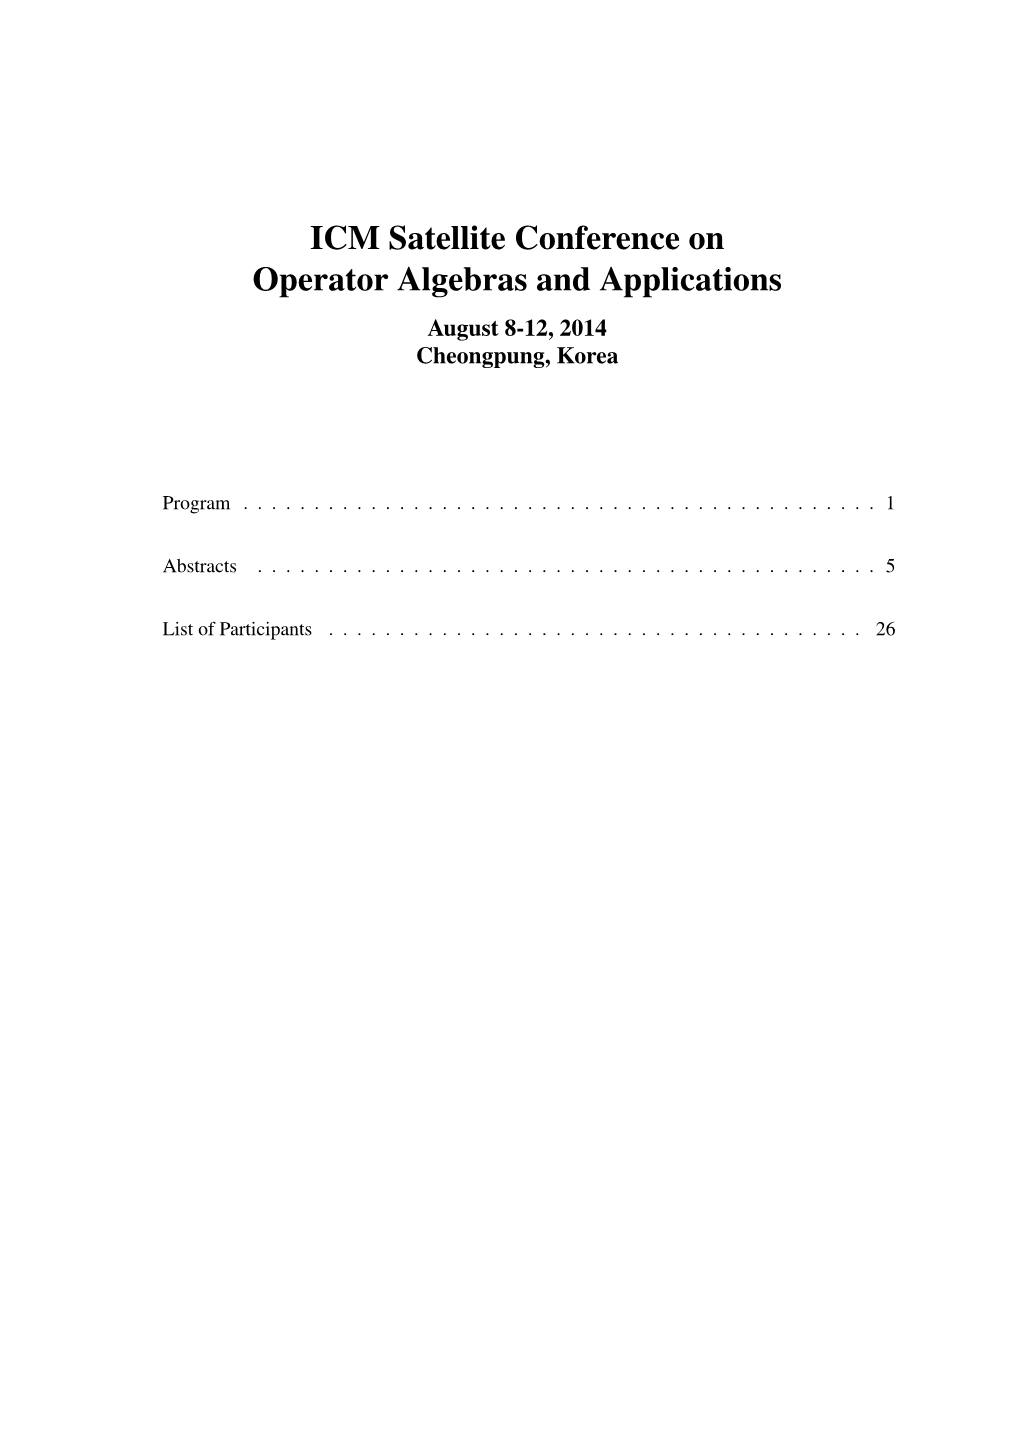 ICM Satellite Conference on Operator Algebras and Applications August 8-12, 2014 Cheongpung, Korea